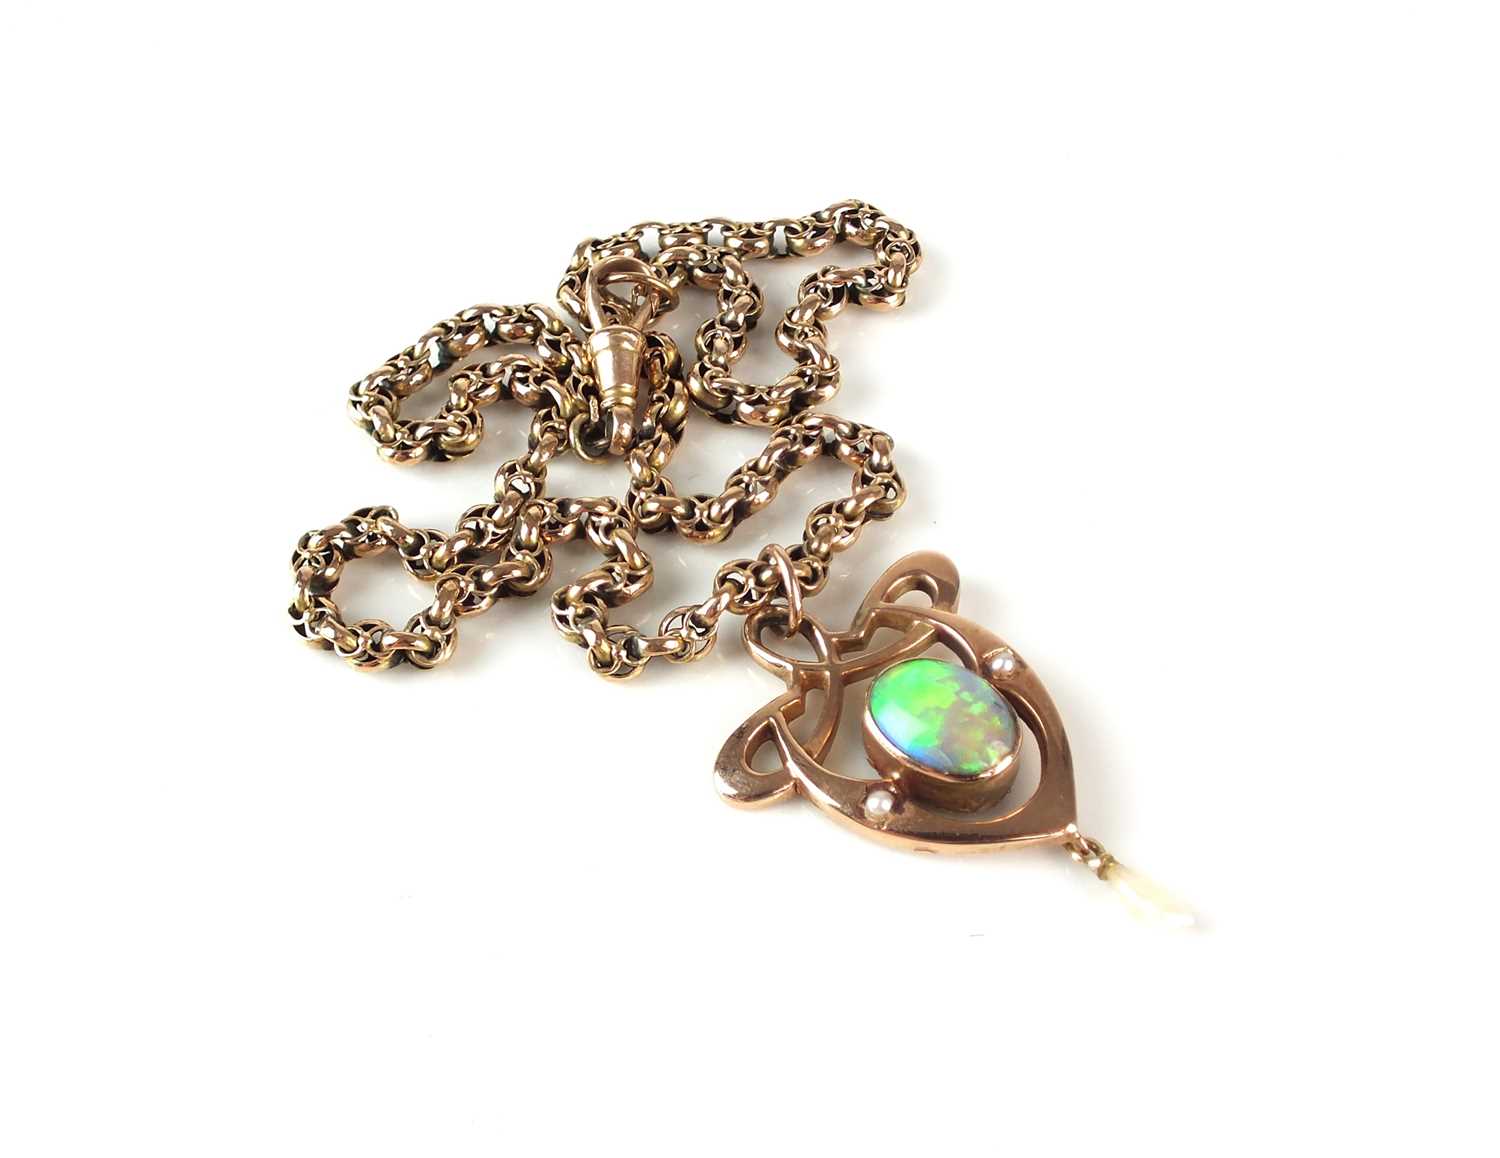 An Arts and Crafts opal pendant on chain